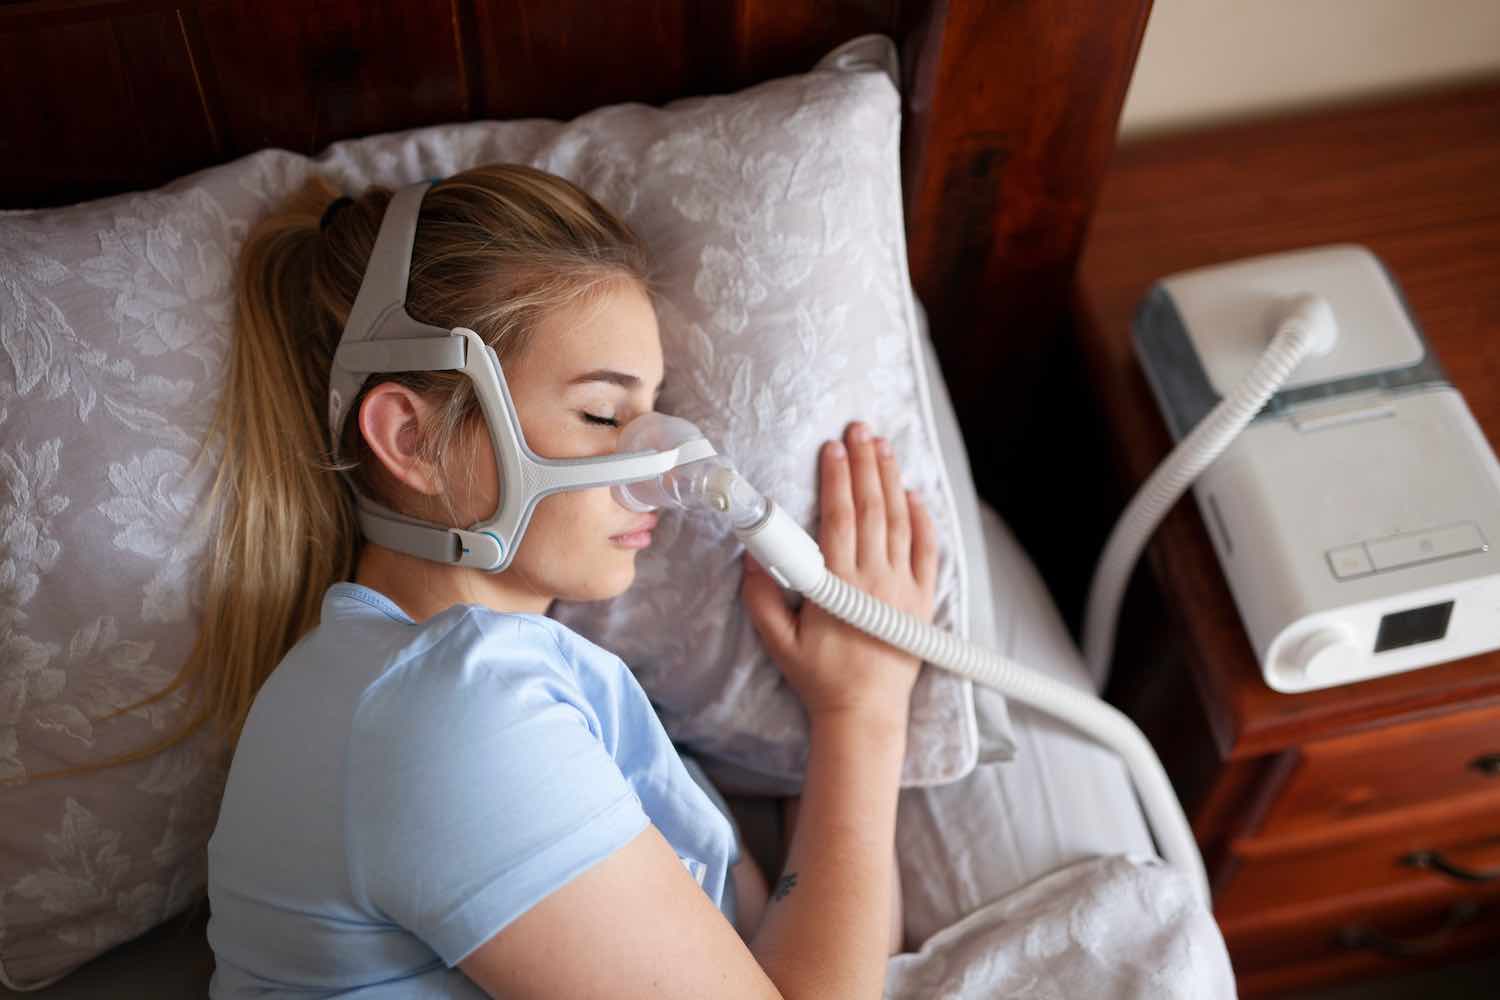 Rare CPAP machine tips that are quite helpful